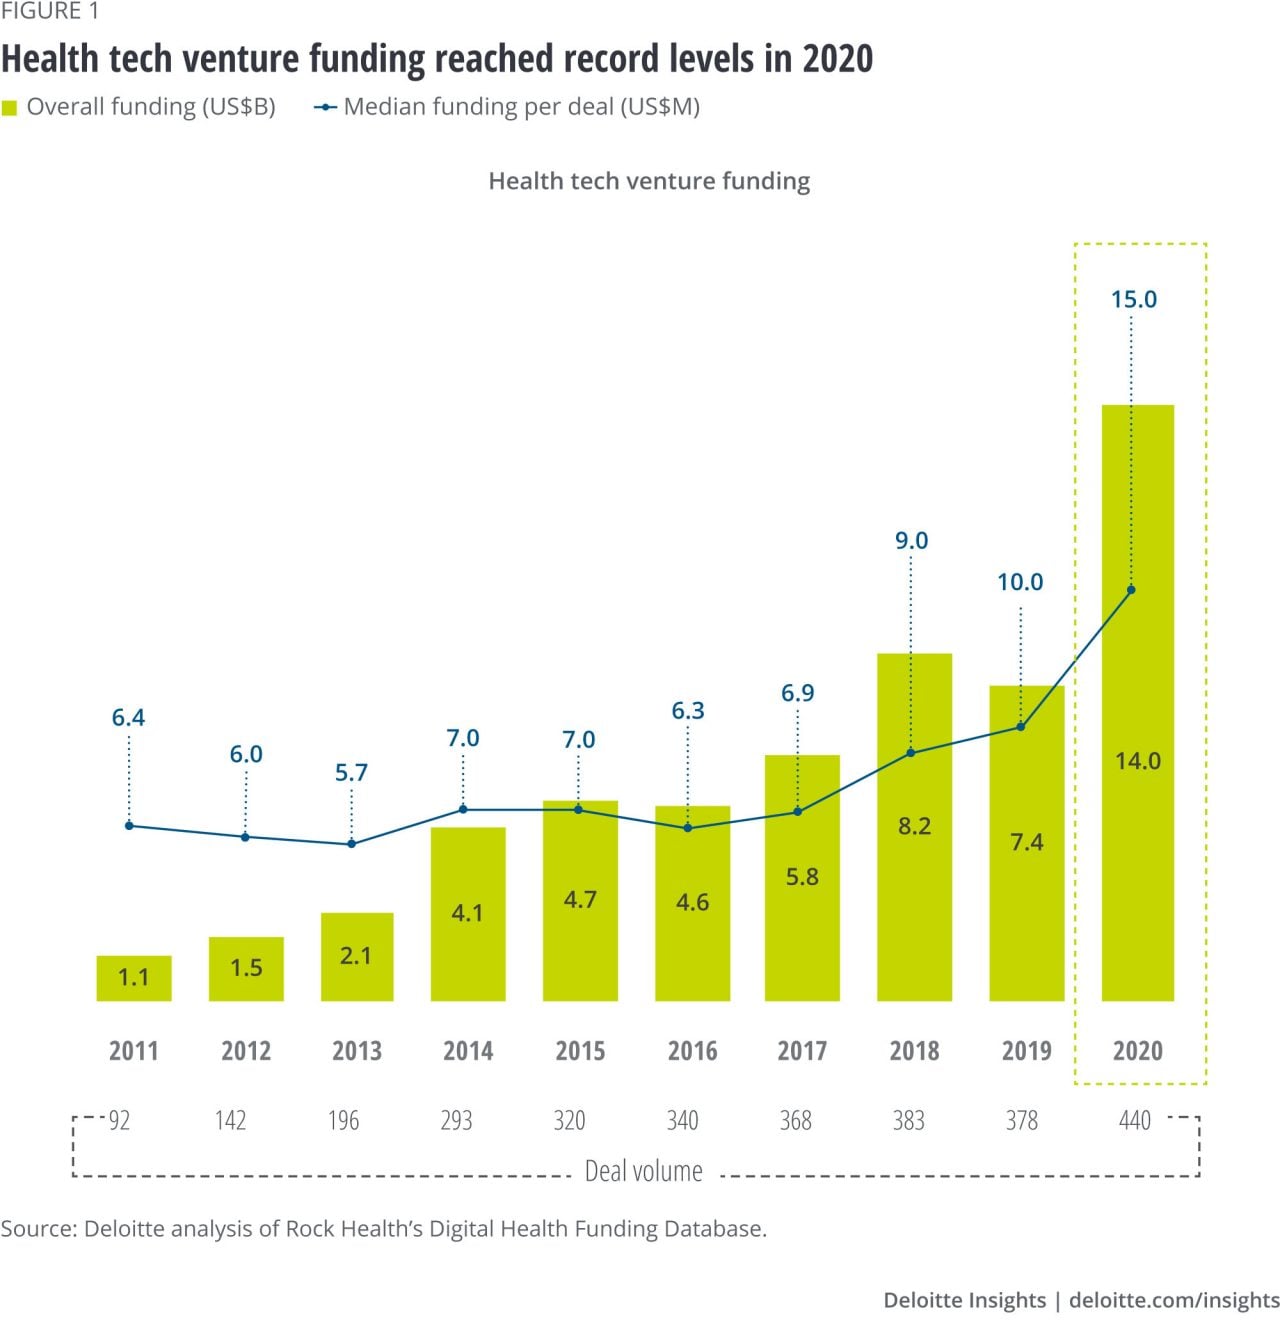 Figure 1. Health tech venture funding reached record levels in 2020